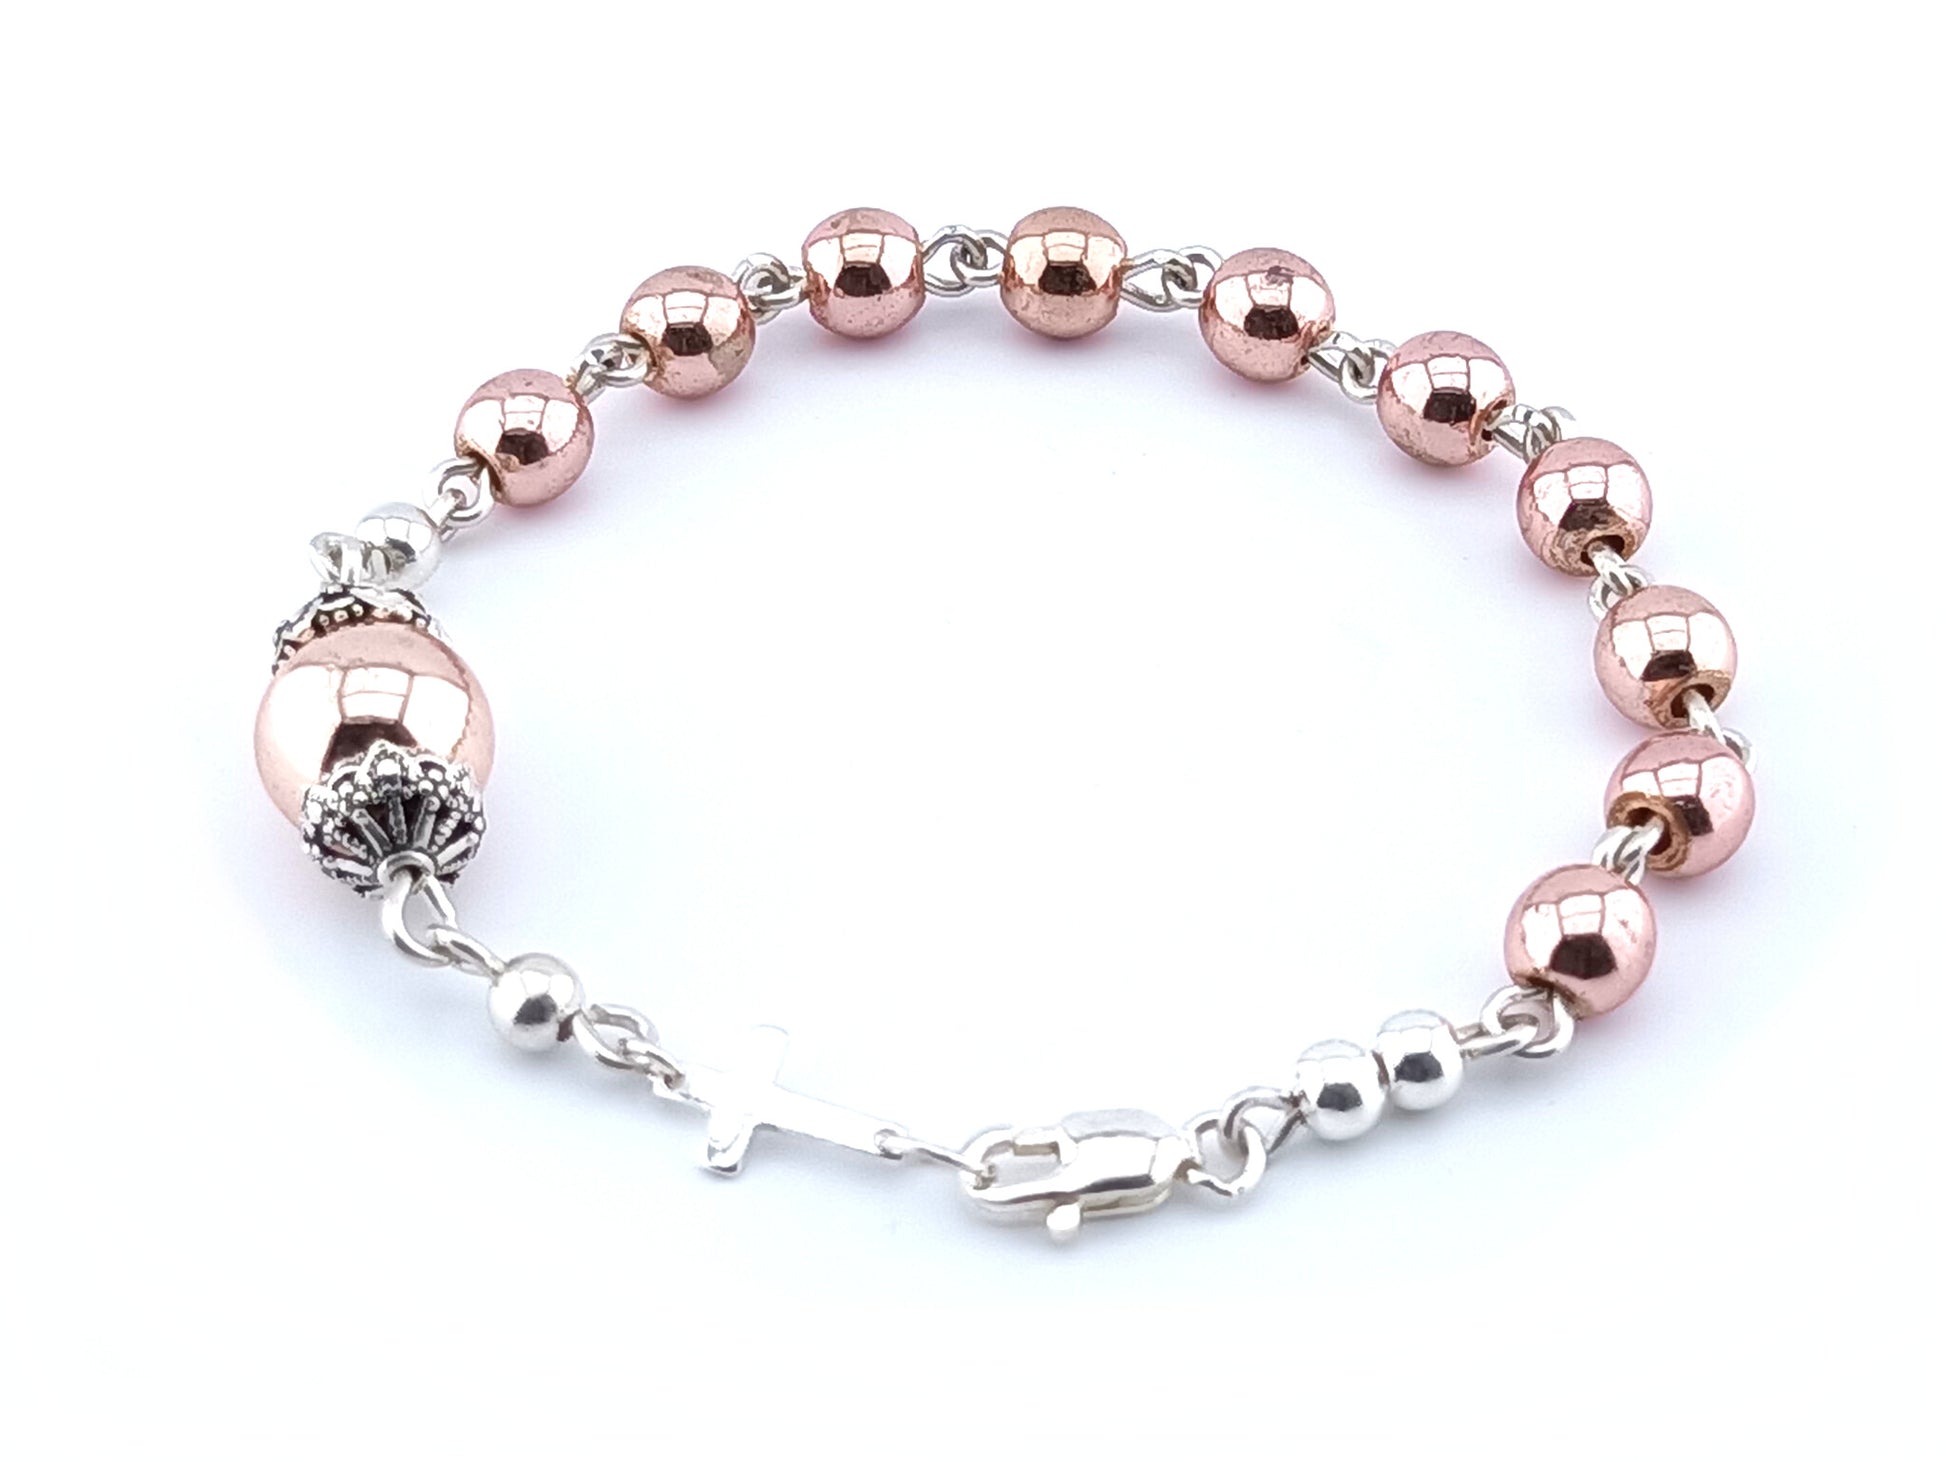 Rose Gold unique rosary beads single decade rosary bracelet in 925 solid sterling silver with rose gold plated beads.